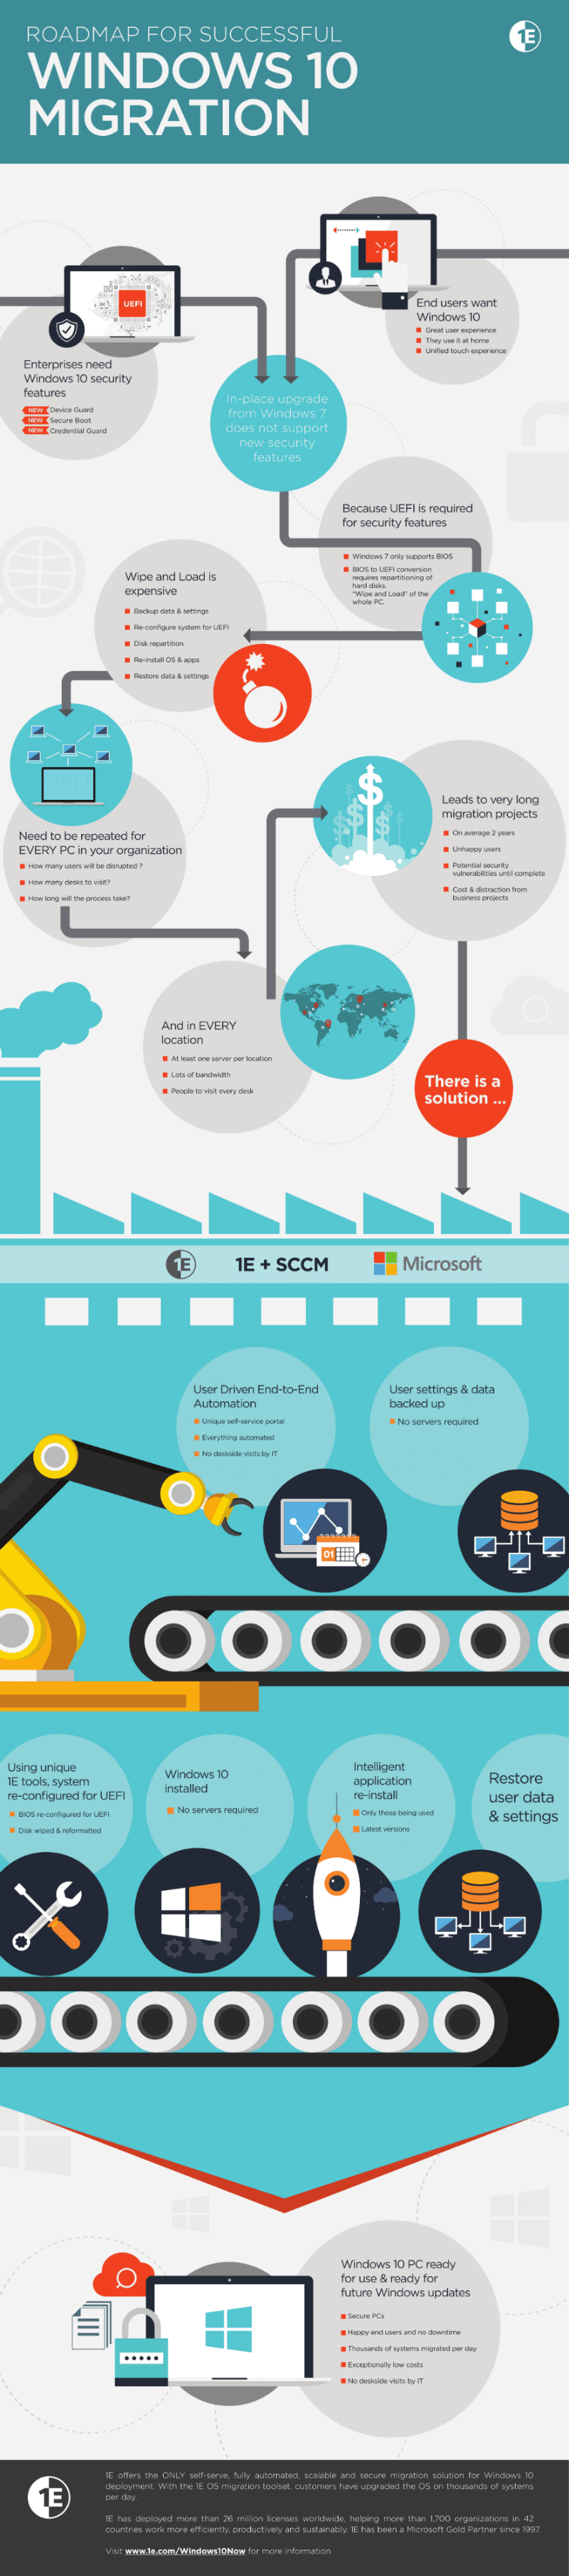 win-10-migration-infographic-800 windows 10 roadmap for success